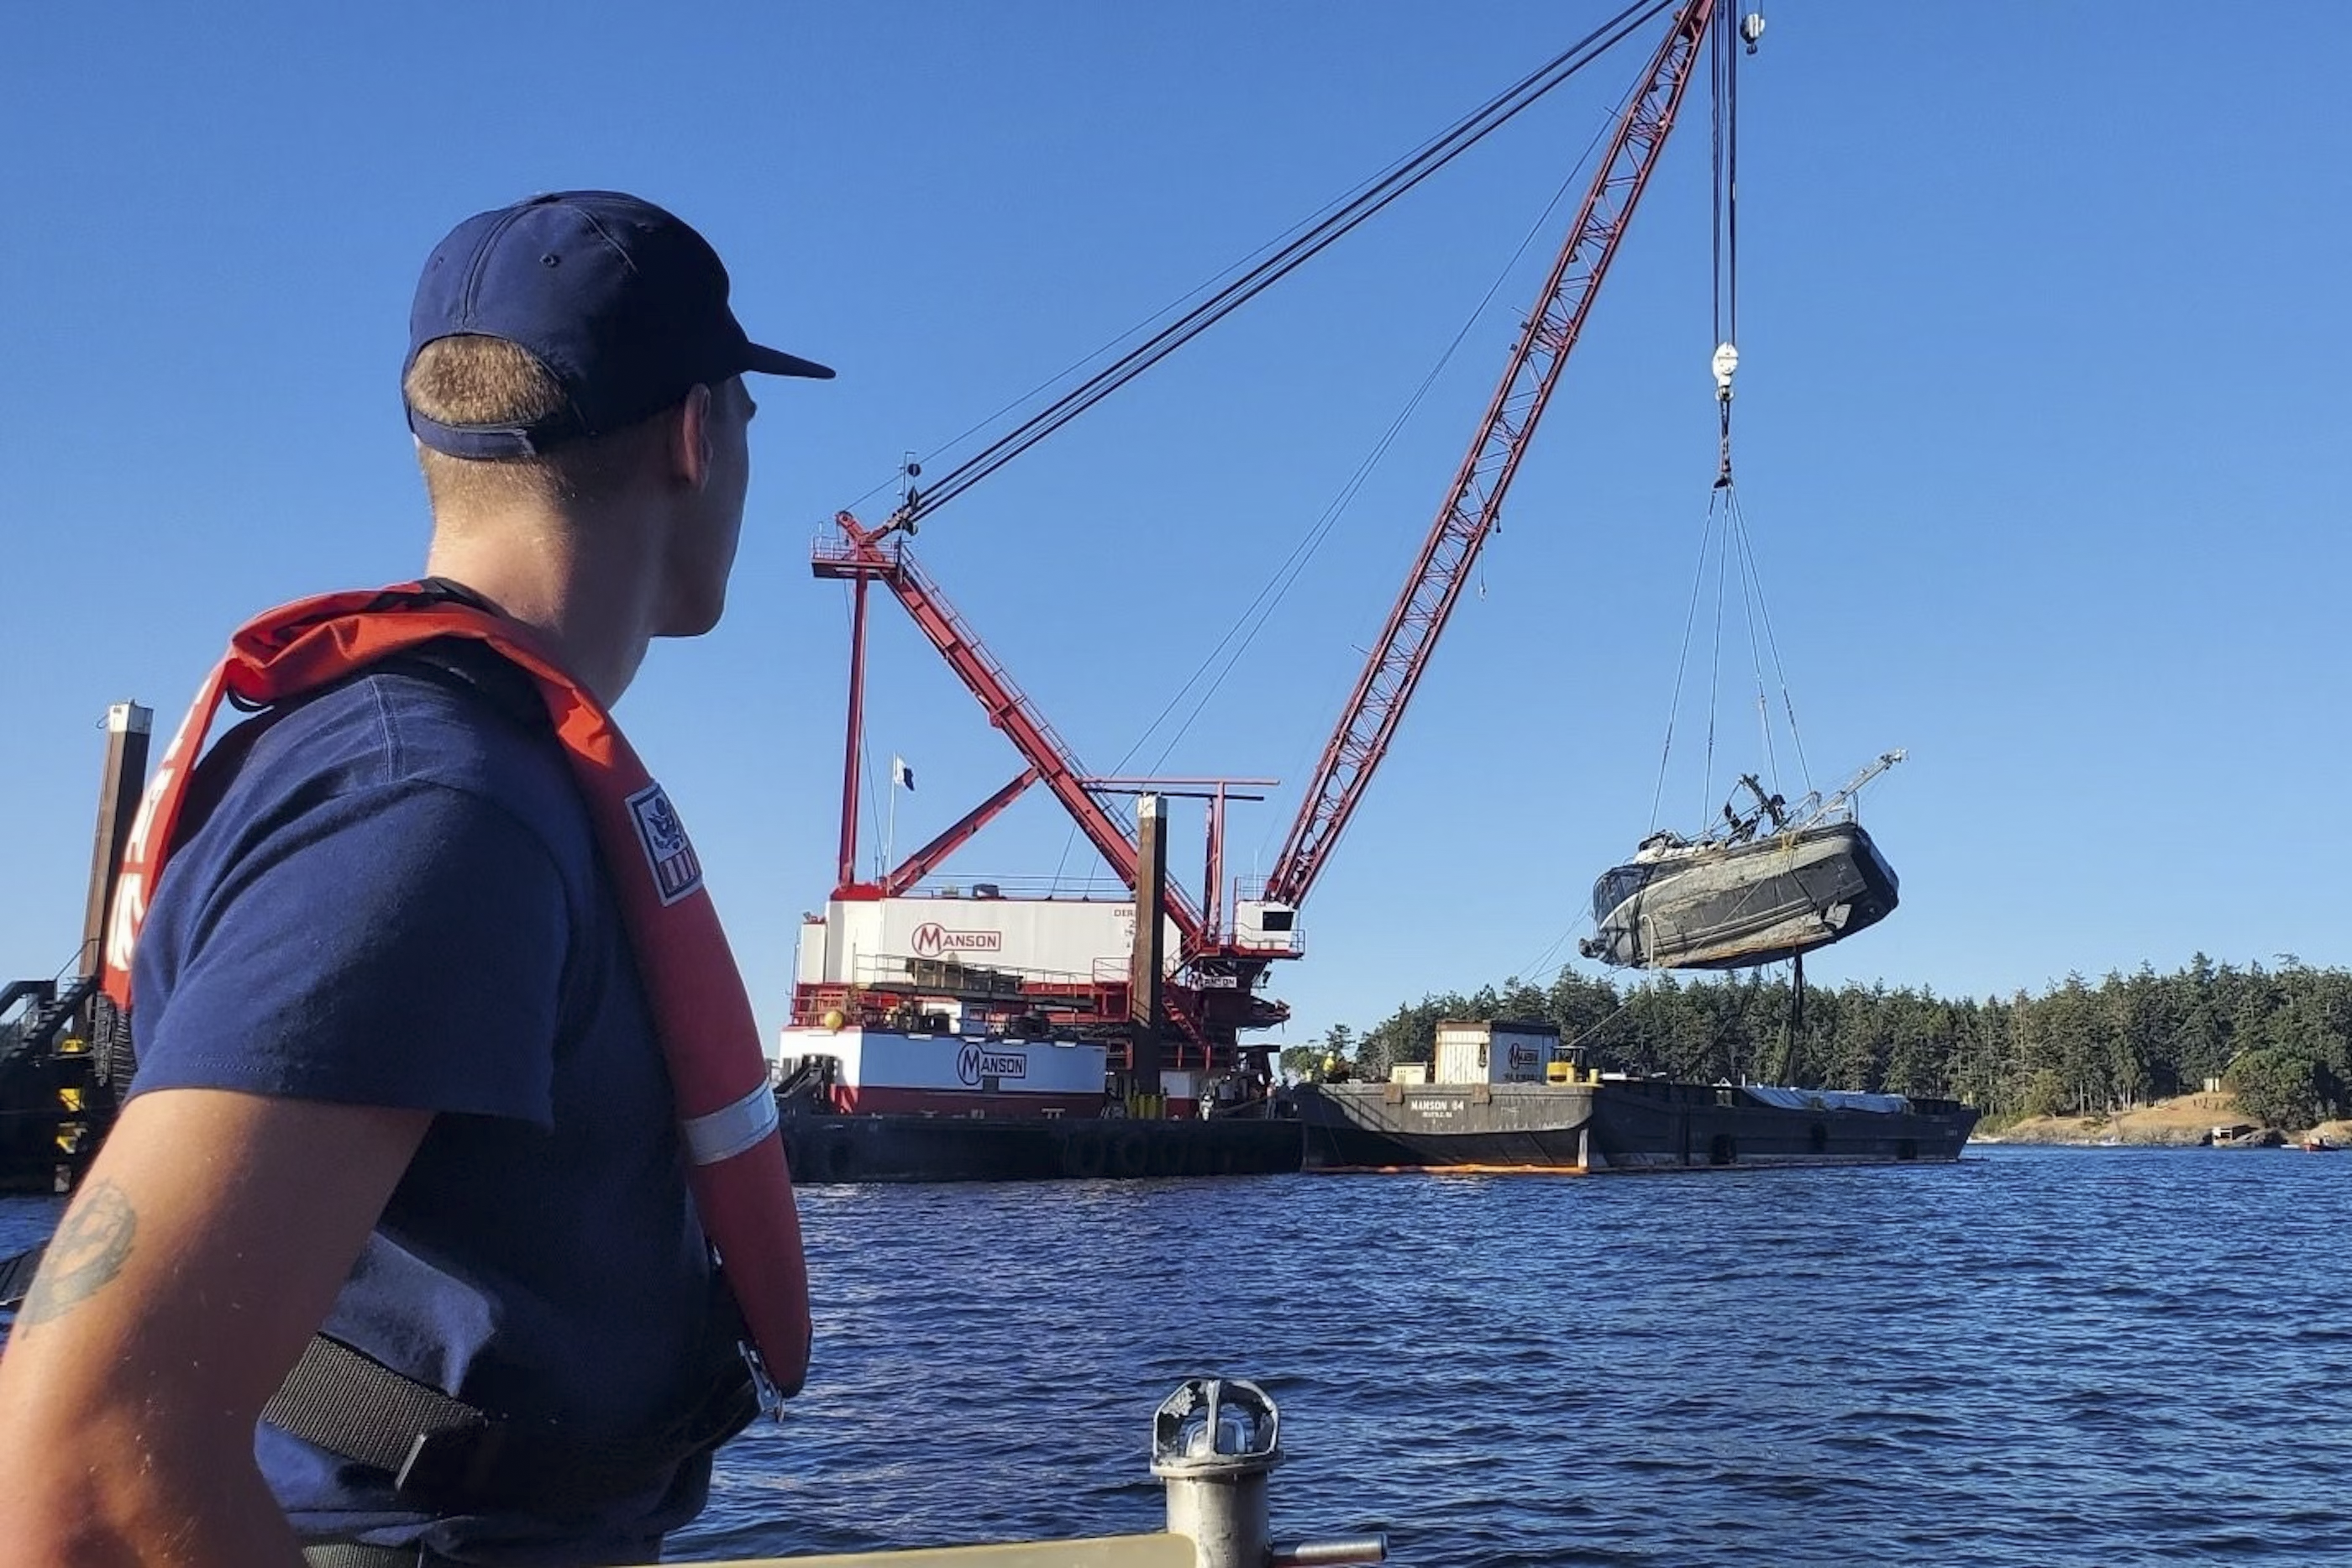 A Coast Guard member watches the F/V Aleutian Isle being lifted onto a barge off San Juan Island on Sept. 21, 2022. Image credit: U.S. Coast Guard